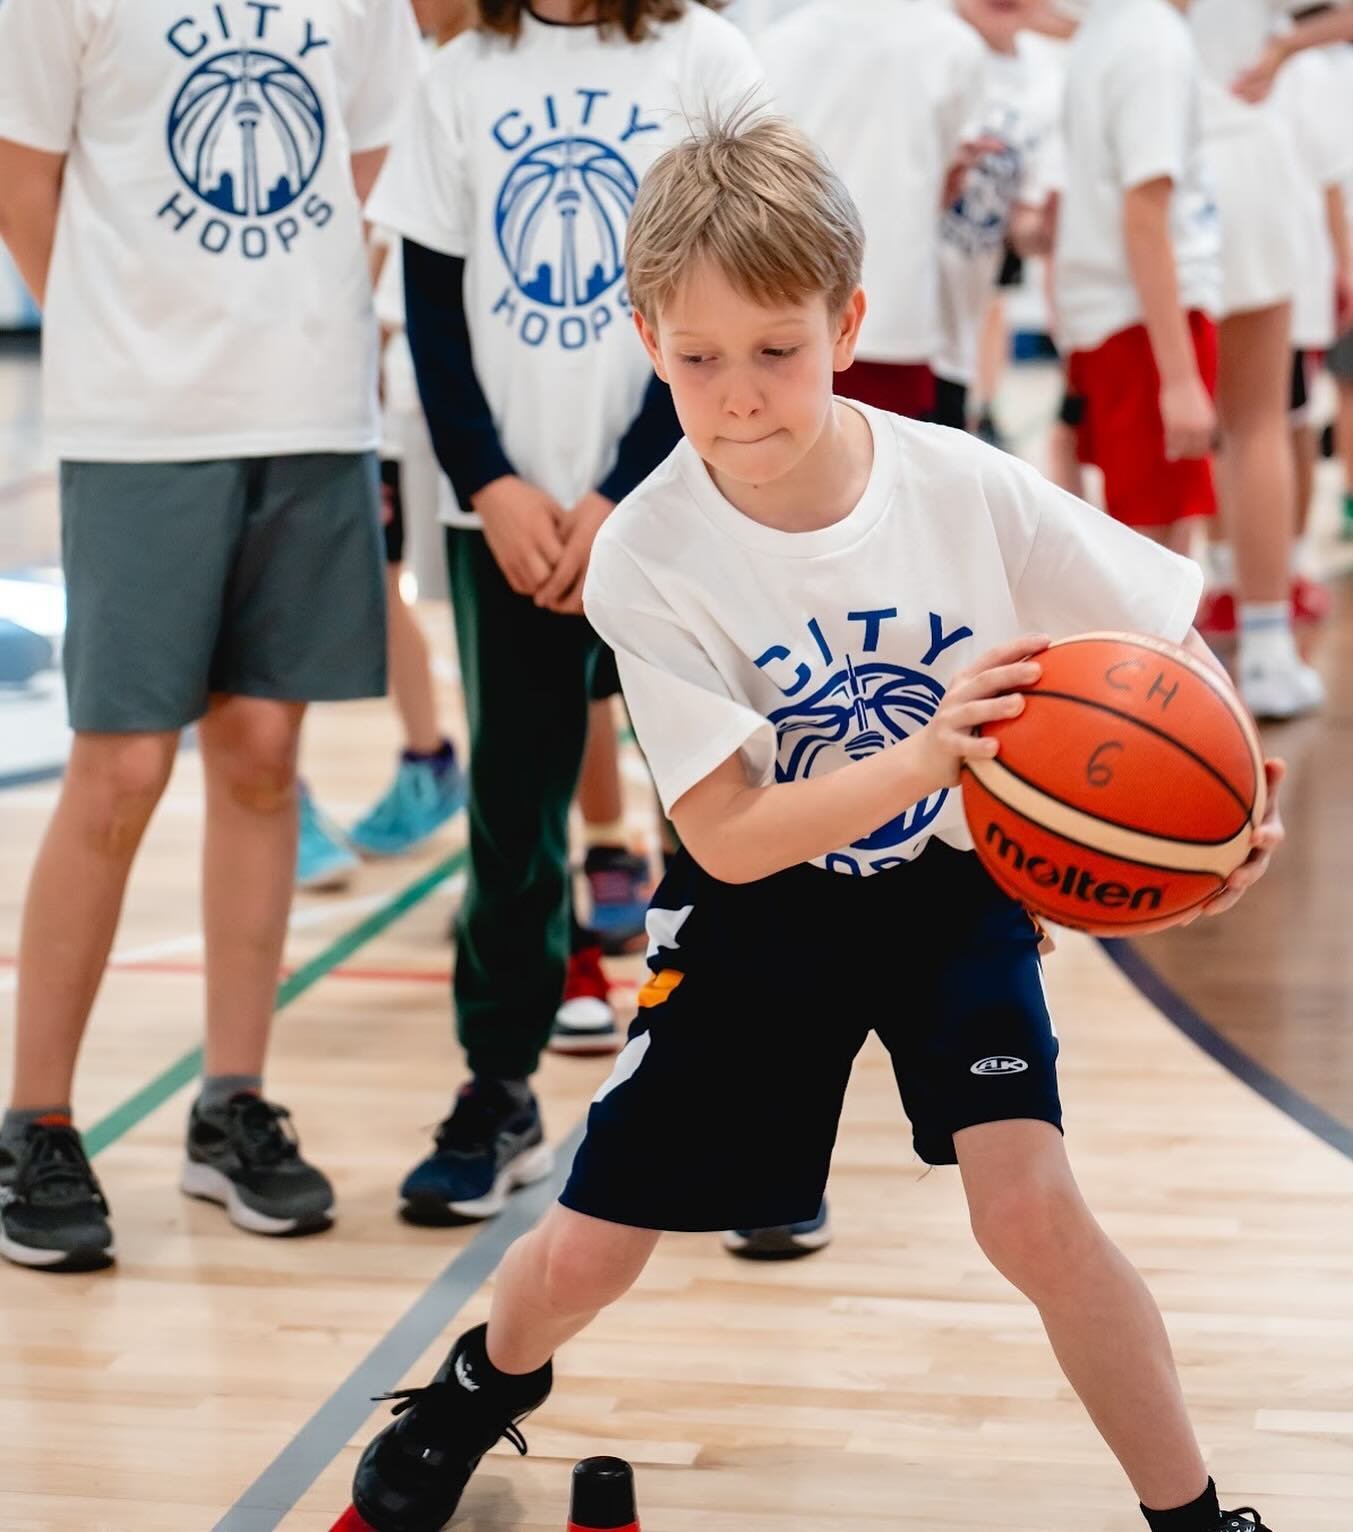 Back in action tonight as Spring Season Term 2 starts!

The offseason is where players develop and add to their game. What will you add to your game before next season?

#CityHoops #Basketball #Toronto #Youth #Camps